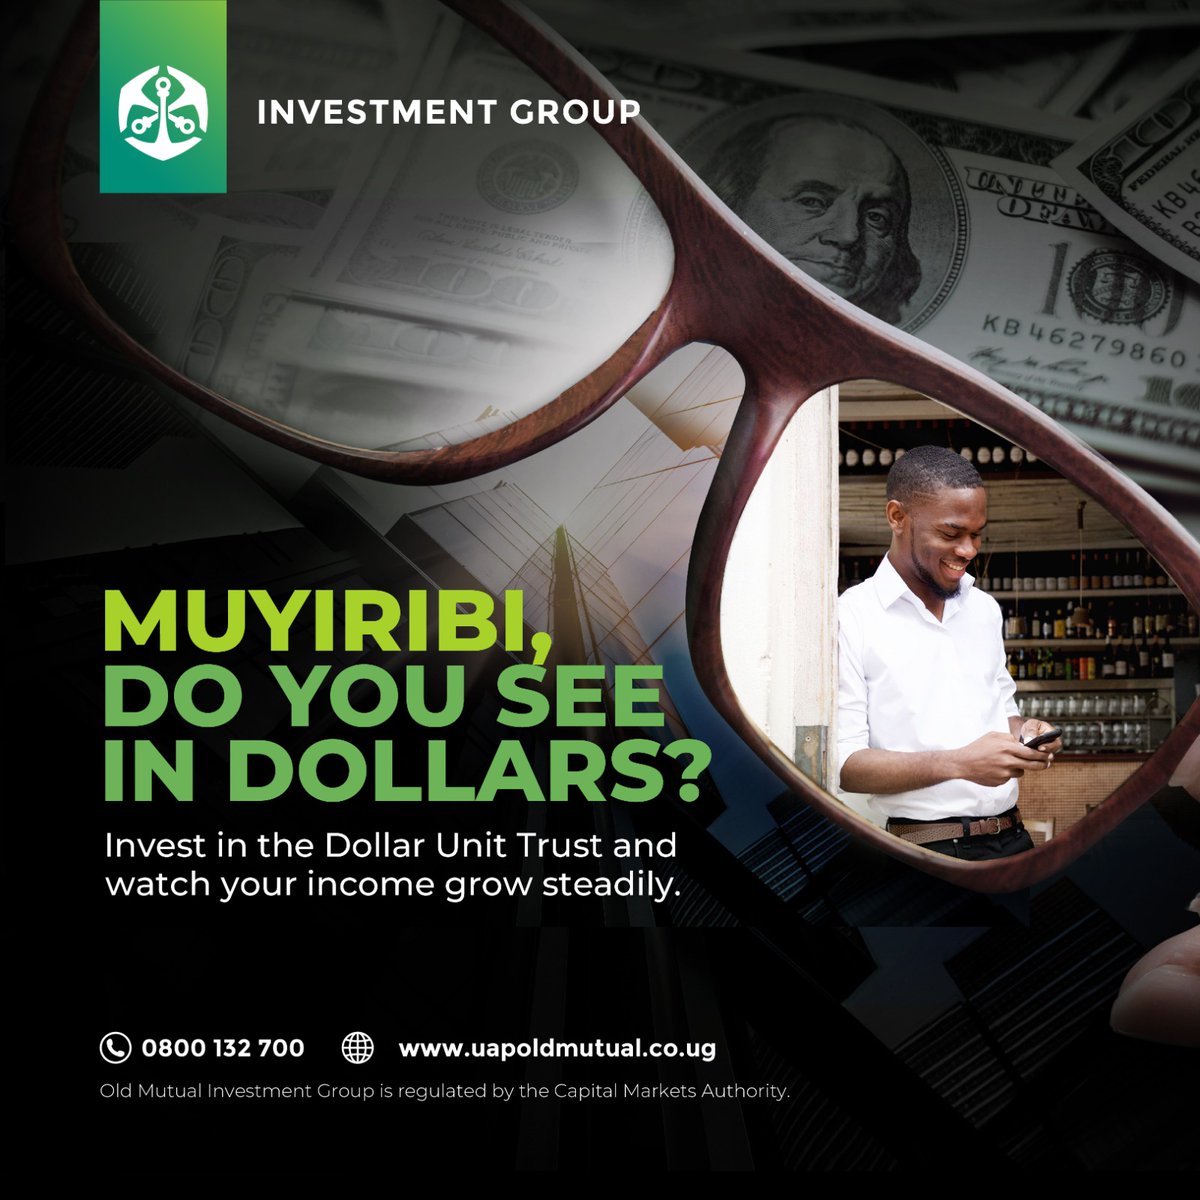 Grow your wealth with the #DollarUnitTrust Fund. Explore the advantage of Dollar-denominated earnings and watch your investments thrive with the stability and strength of the Dollar.

Call: 0800132700 to get started
#TutambuleFfena